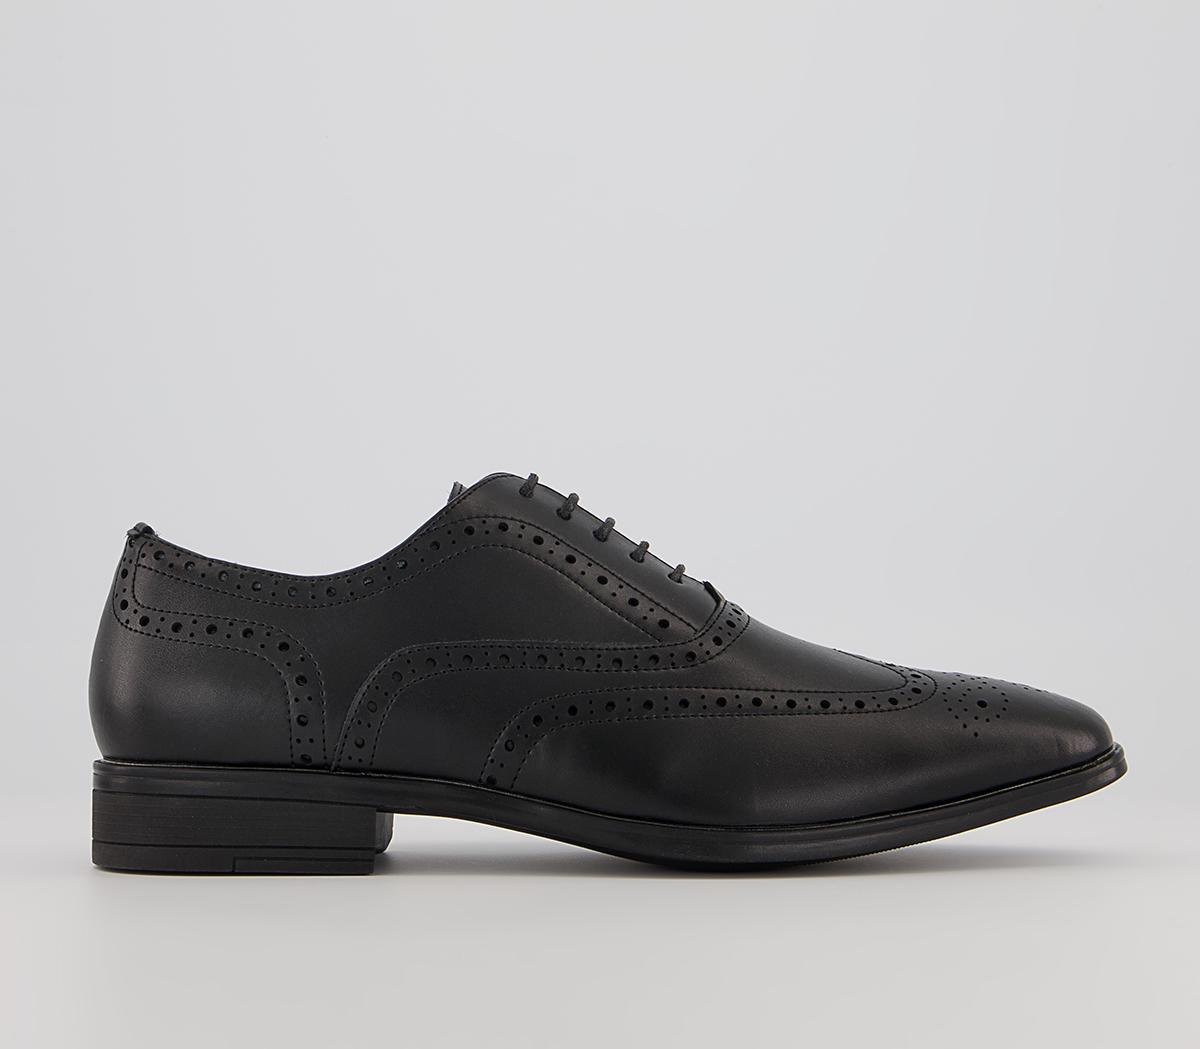 OfficeMacro 2 Oxford Brogues Black Leather